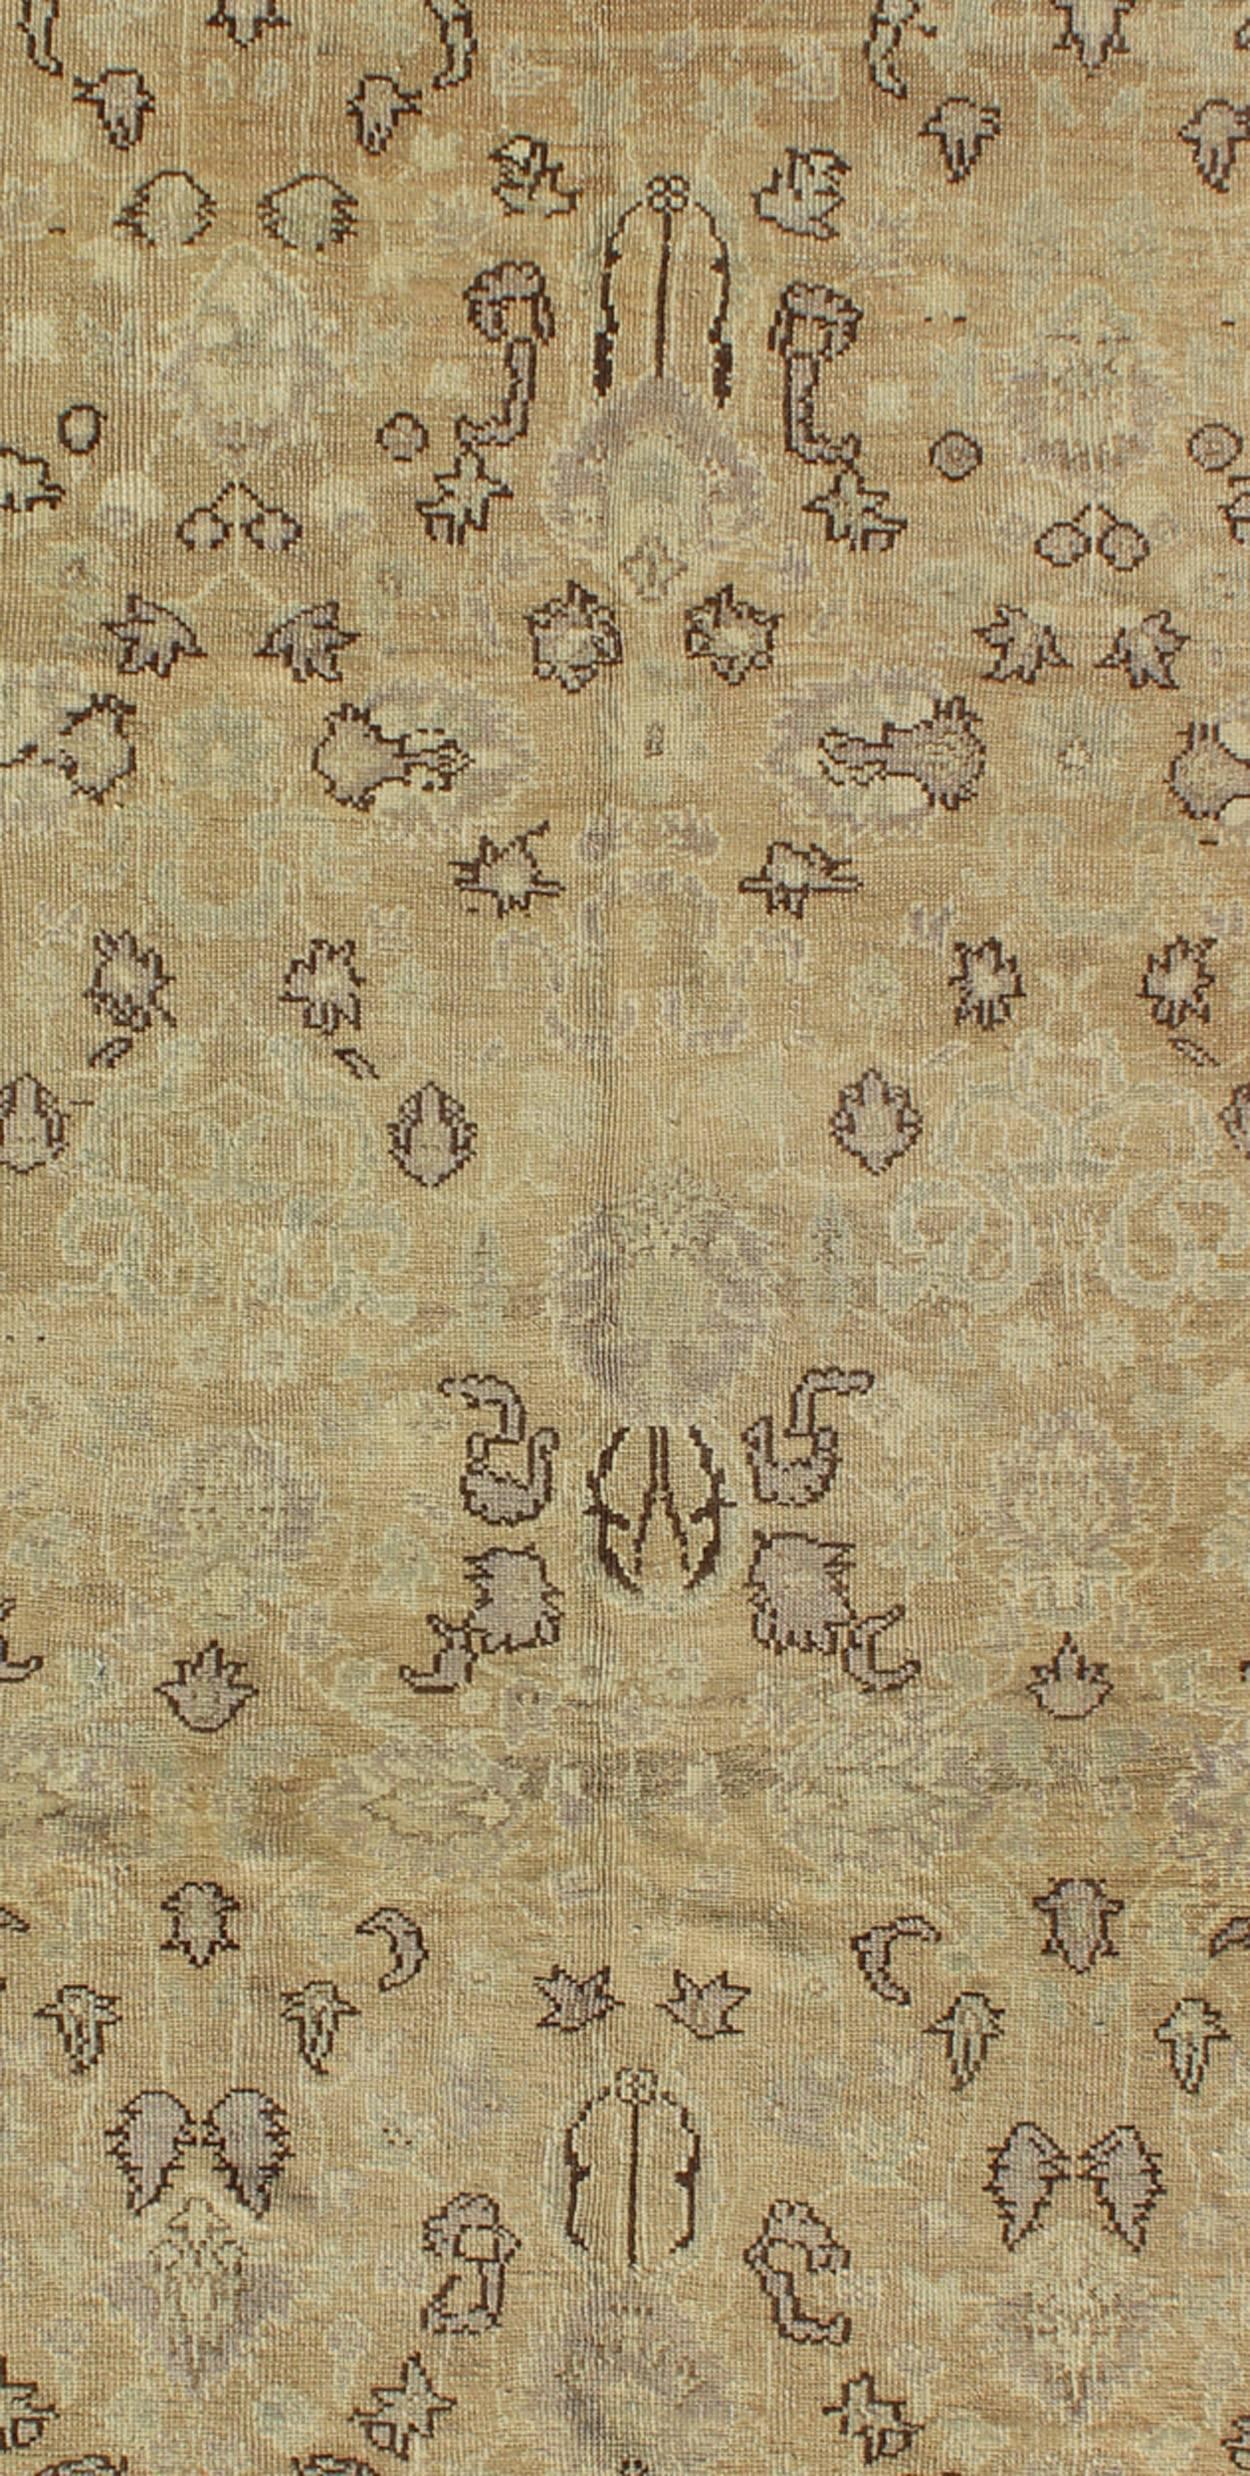 Hand-Knotted All-Over Design Turkish Oushak Vintage Rug in Earth Colors, Tan, Cream, Brown